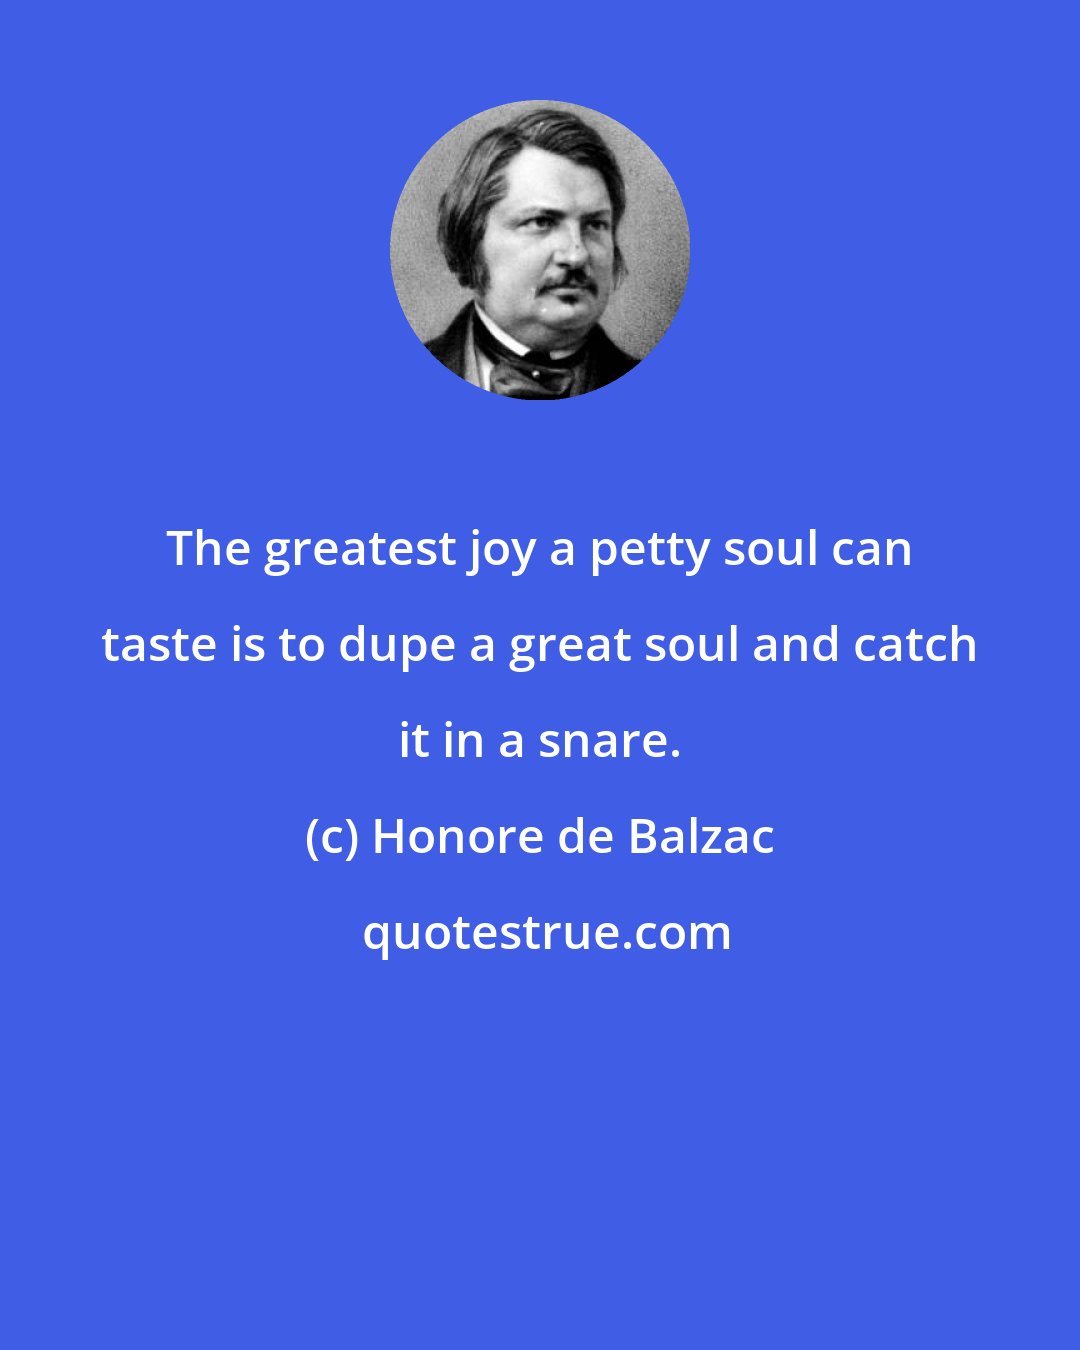 Honore de Balzac: The greatest joy a petty soul can taste is to dupe a great soul and catch it in a snare.